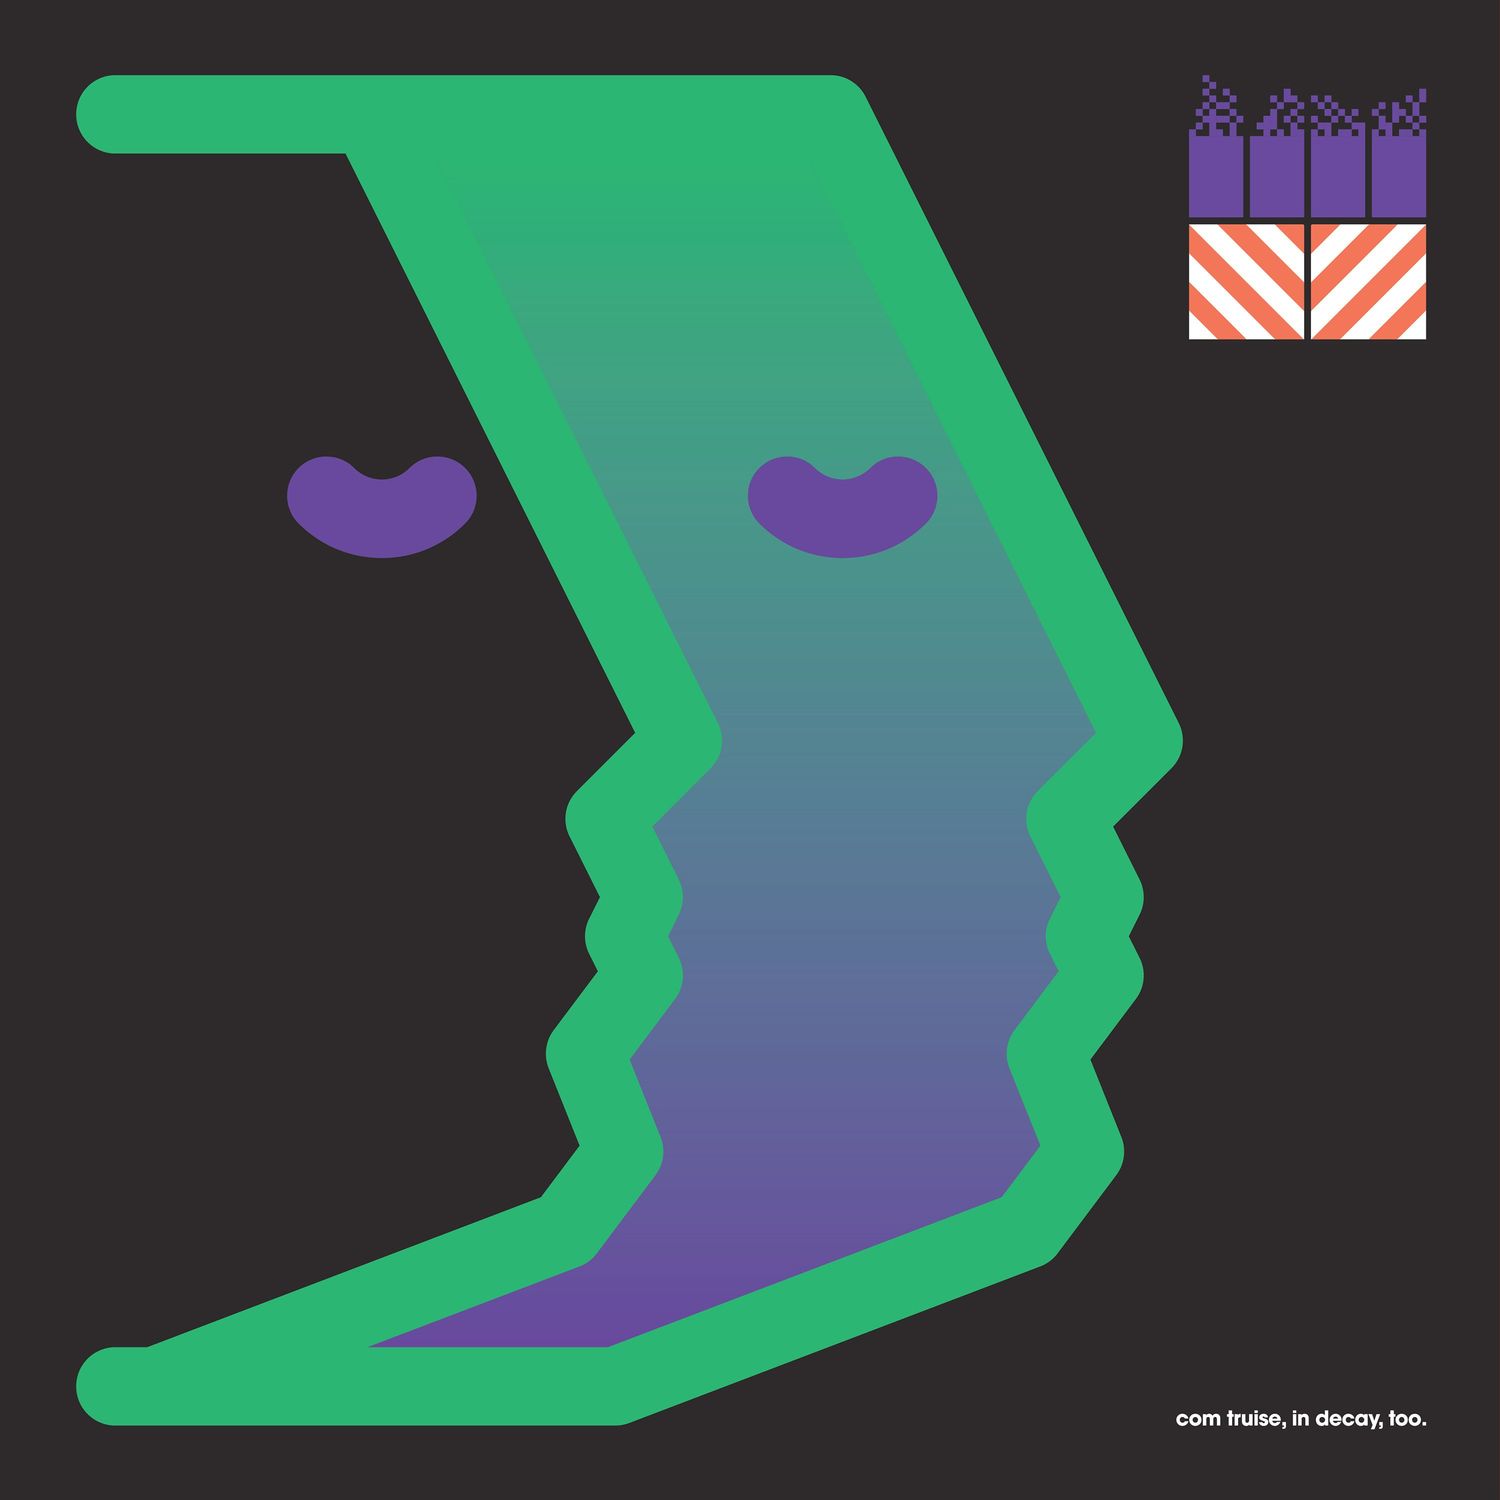 Com Truise – In Decay Too